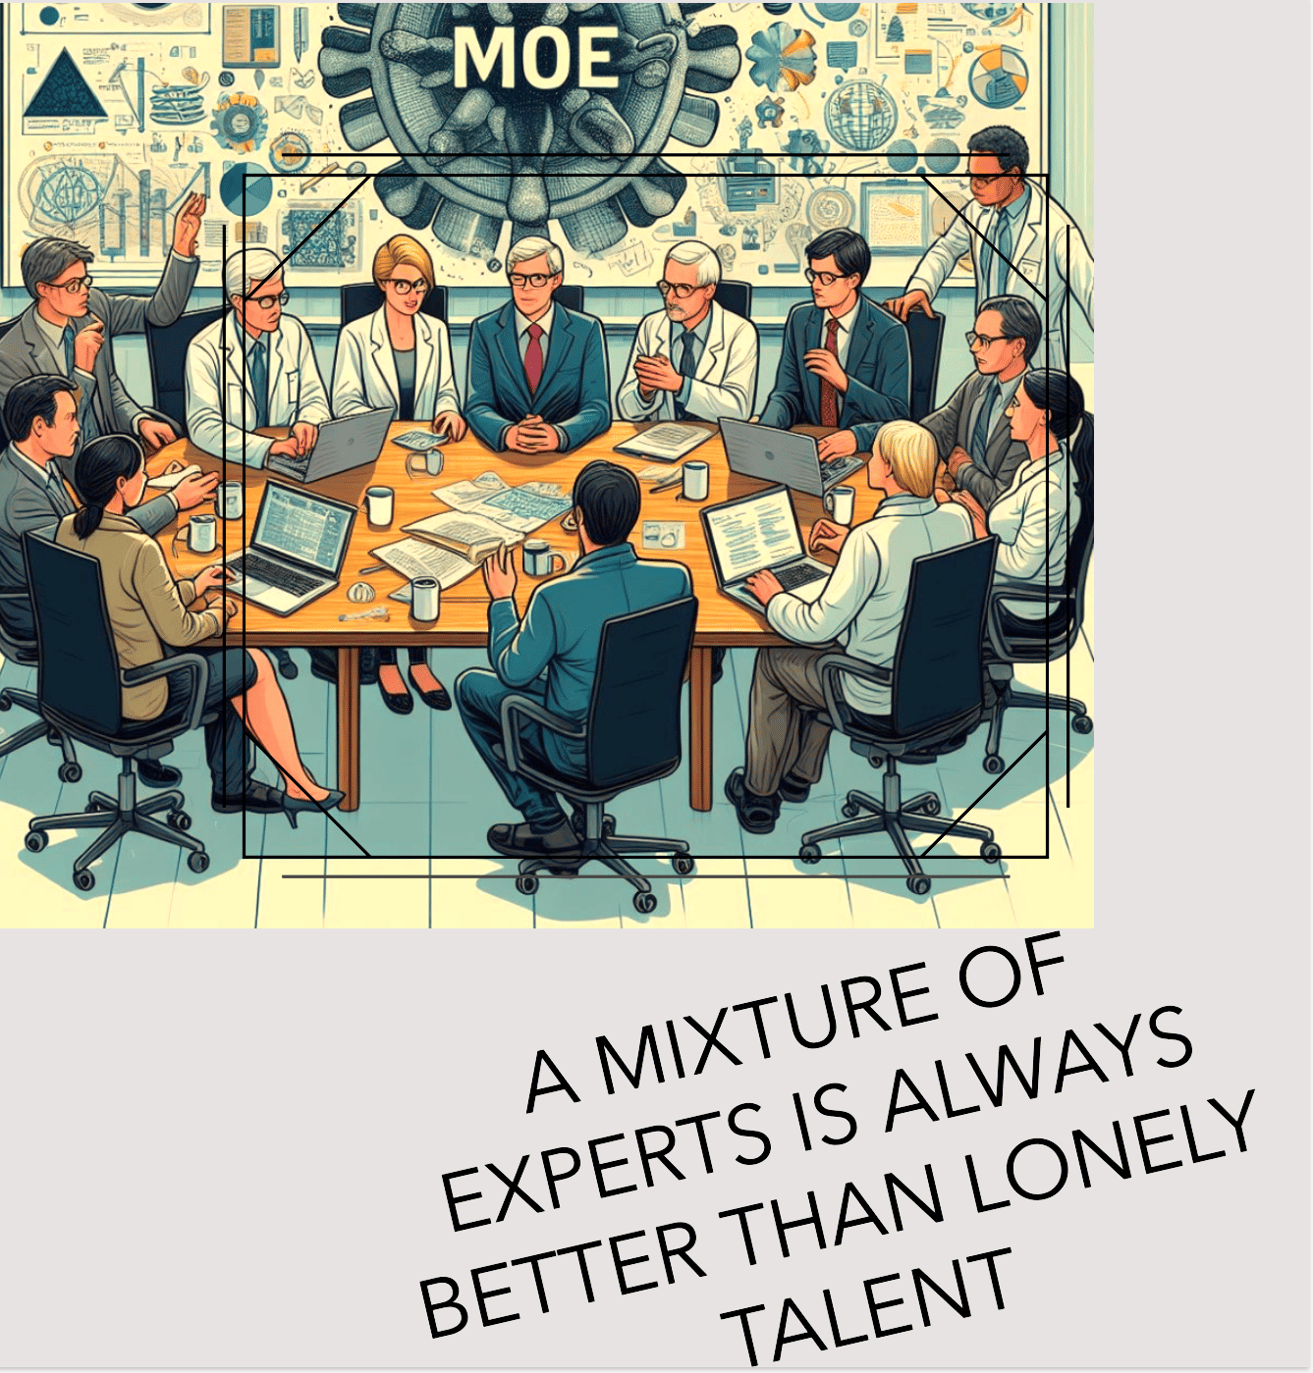 A Mixture of Experts is always better than lonely talent.jpeg